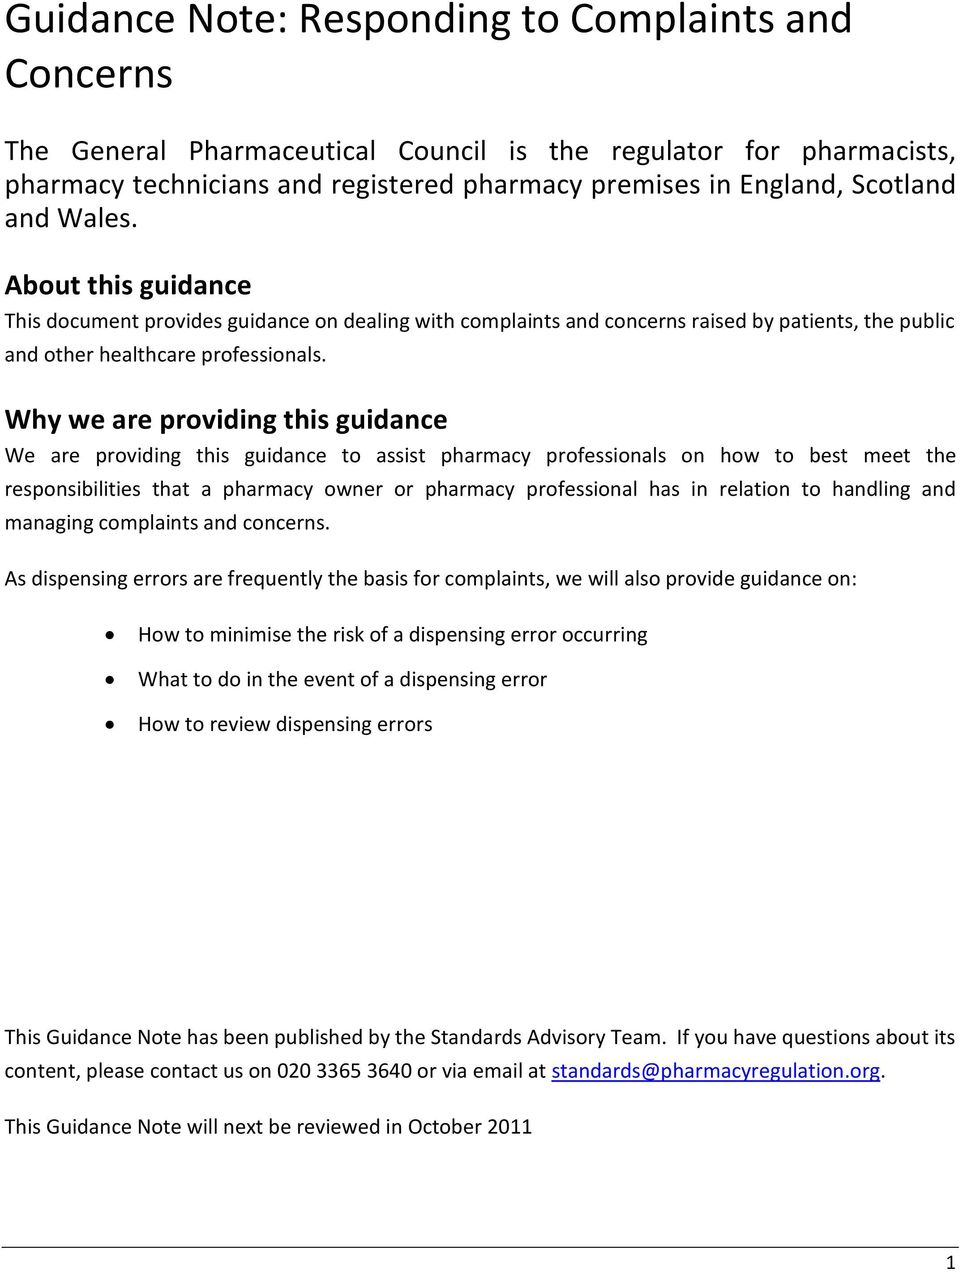 Why we are providing this guidance We are providing this guidance to assist pharmacy professionals on how to best meet the responsibilities that a pharmacy owner or pharmacy professional has in